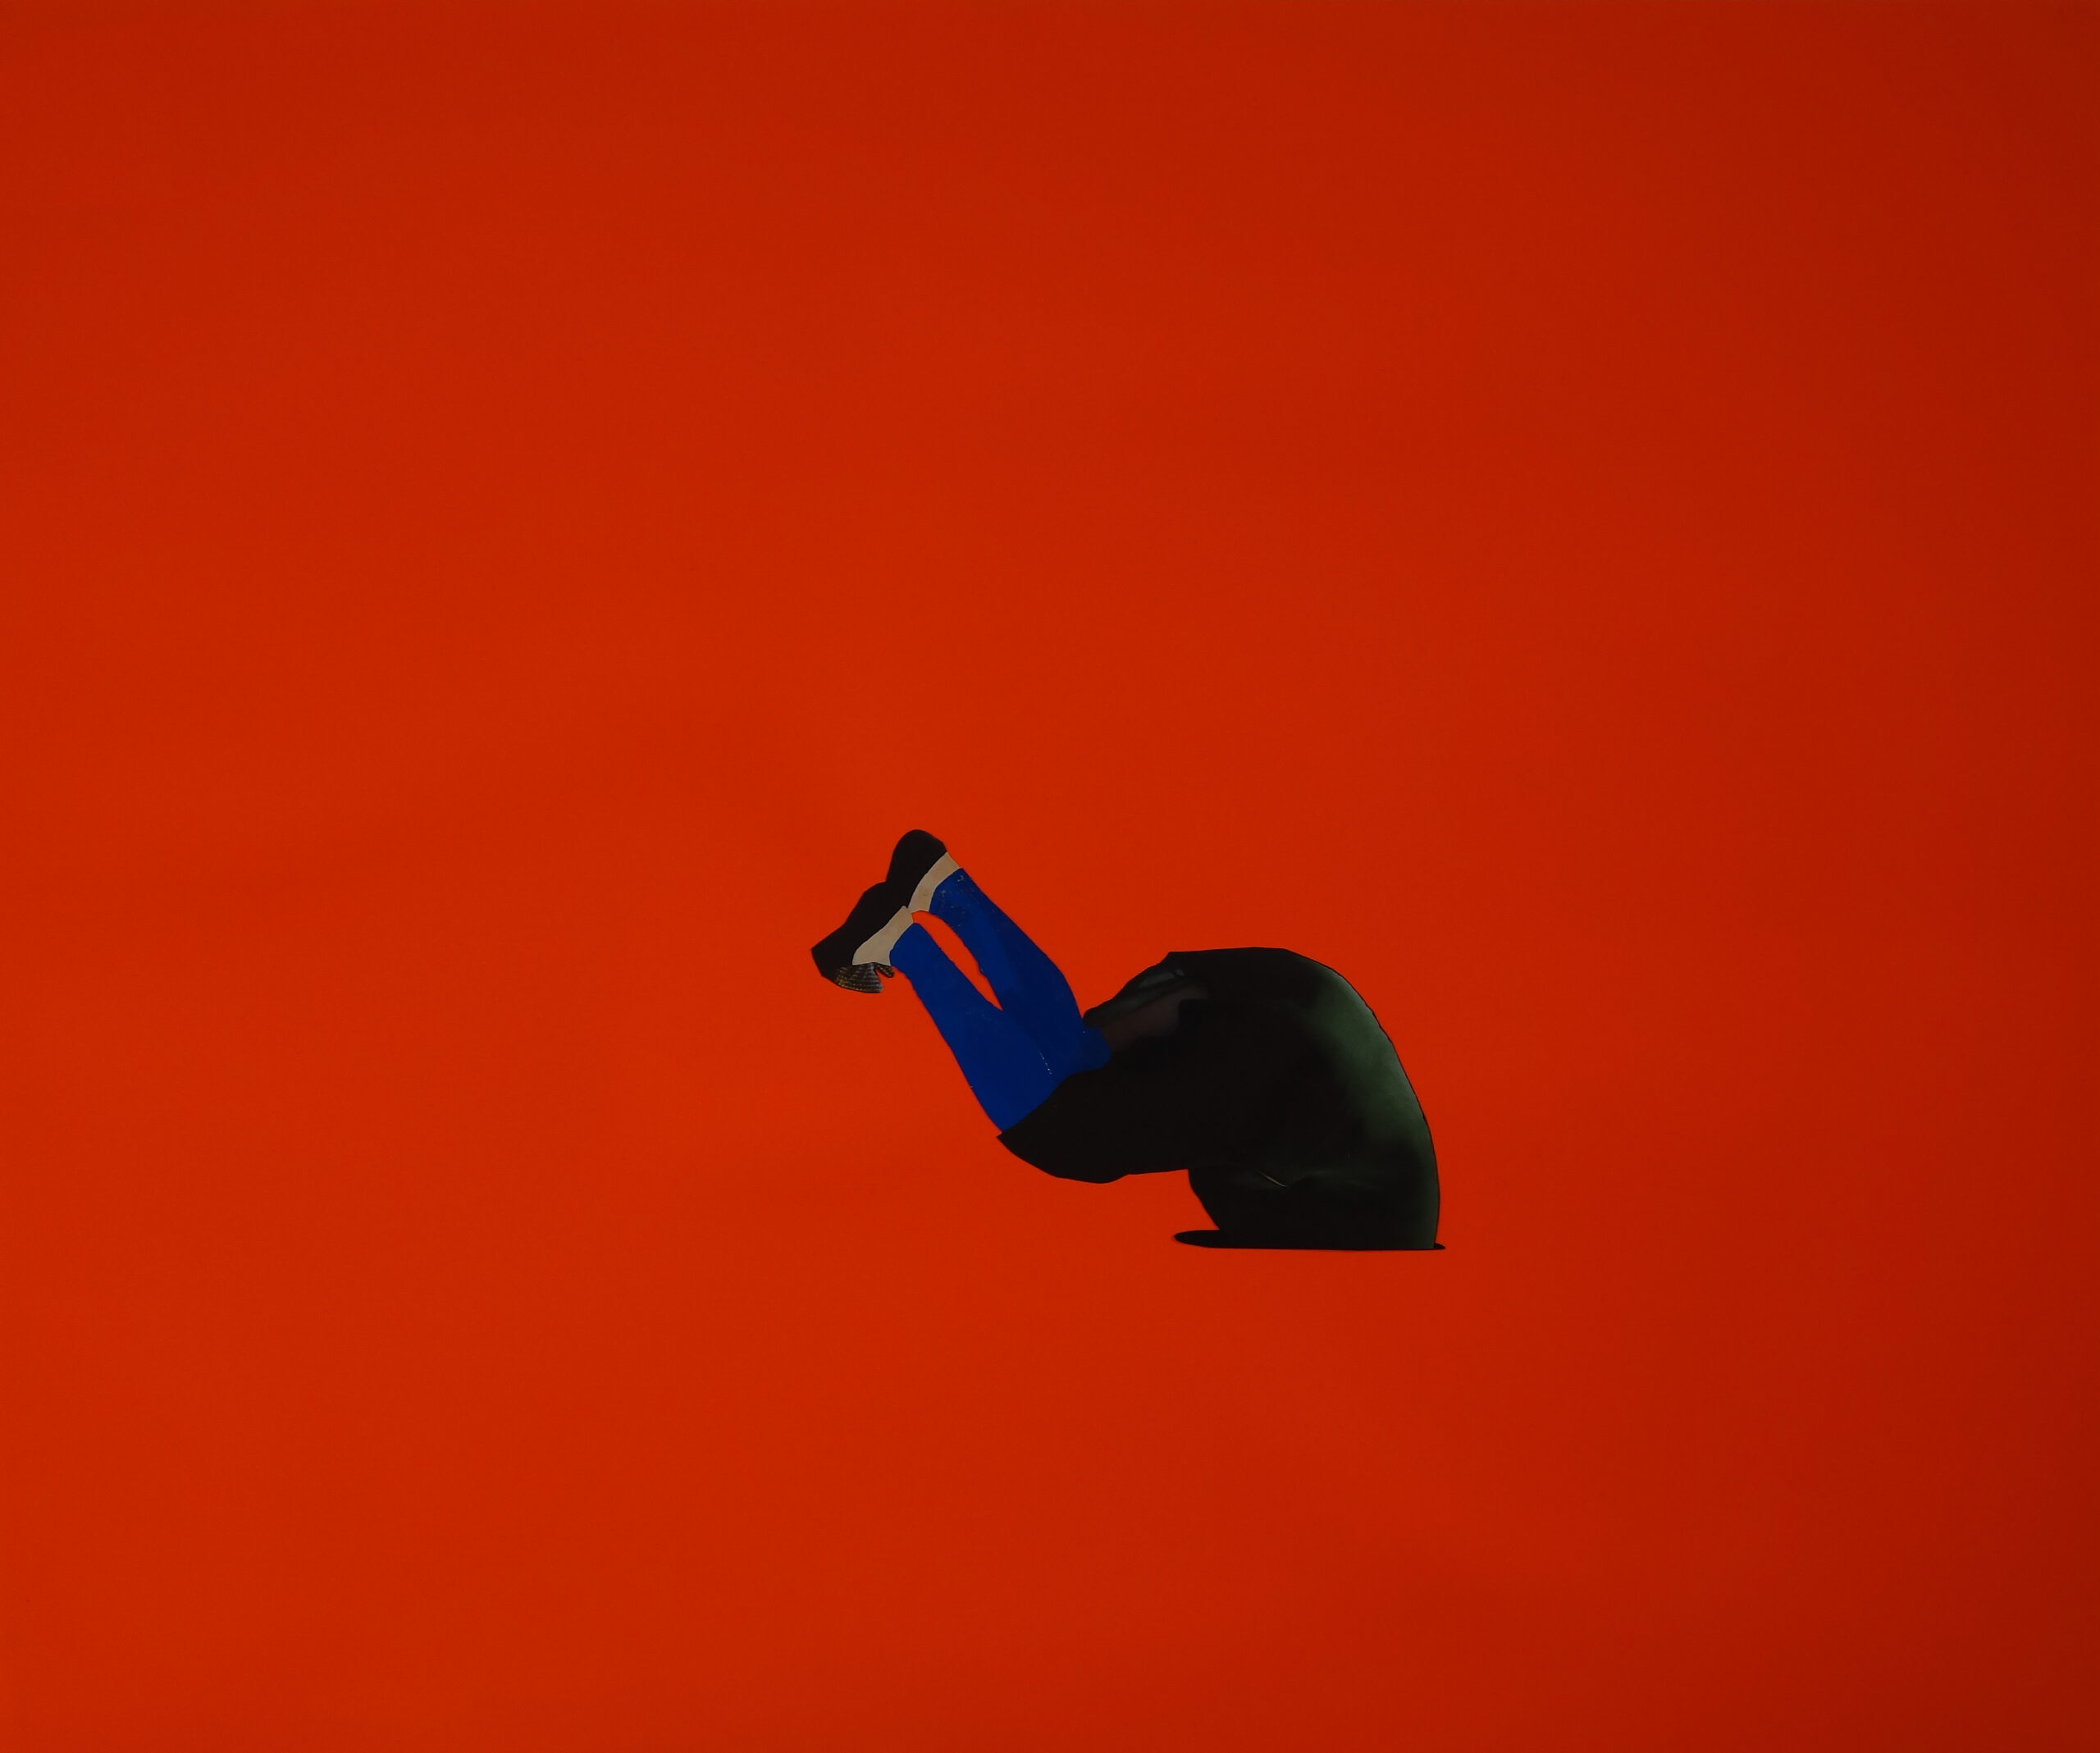 Slip: Against a fluorescent orange backdrop, a painted figure with blue hose and a dark green tunic falls headlong into a black hole